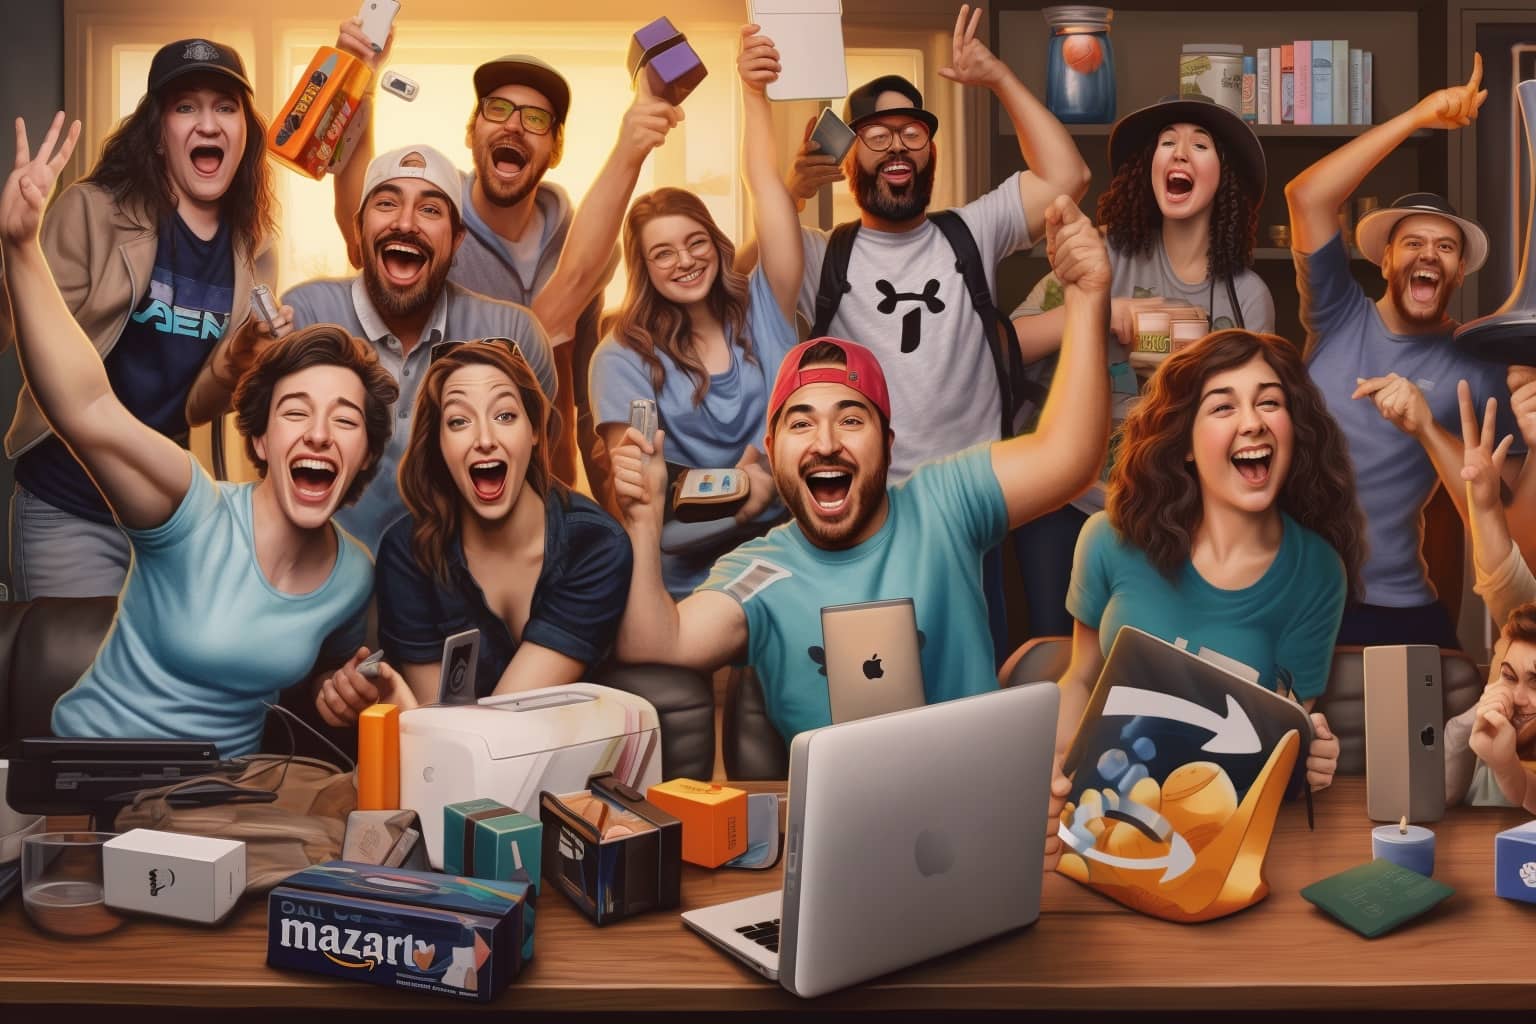 A group of happy Amazon Prime Day customers celebrating their savings on Apple gear